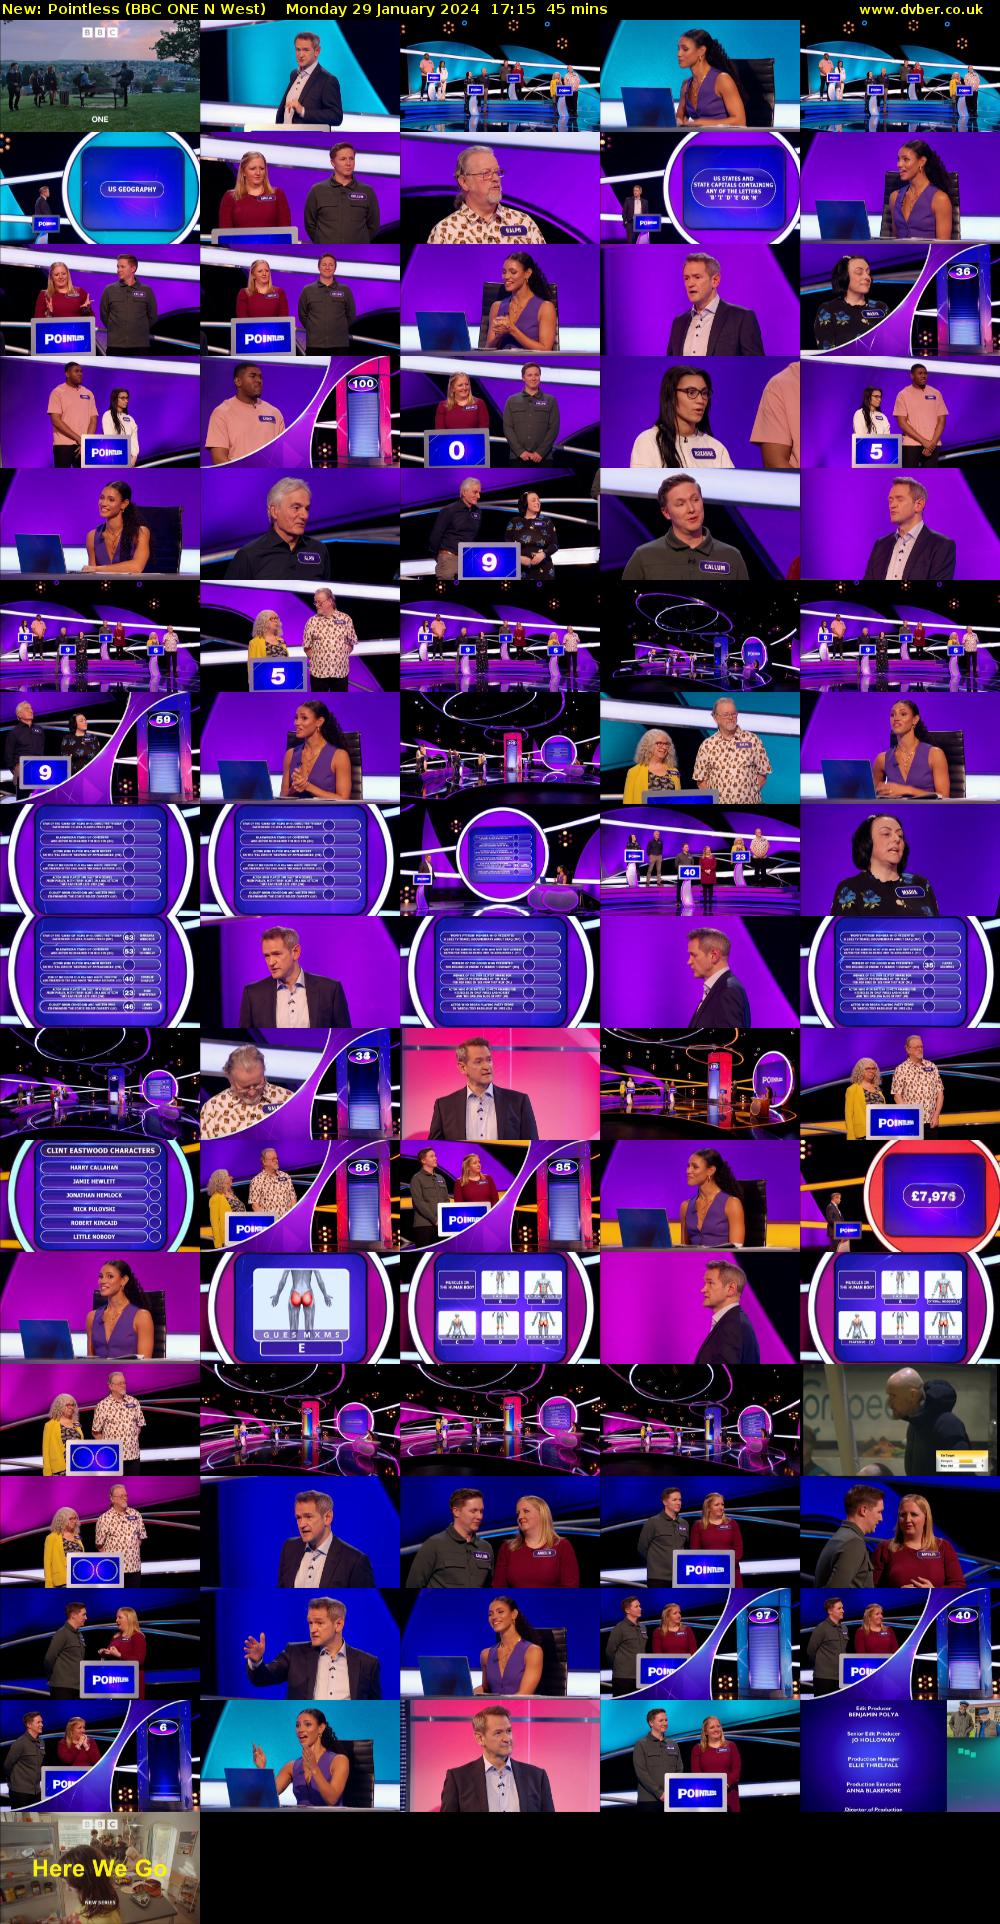 Pointless (BBC ONE N West) Monday 29 January 2024 17:15 - 18:00